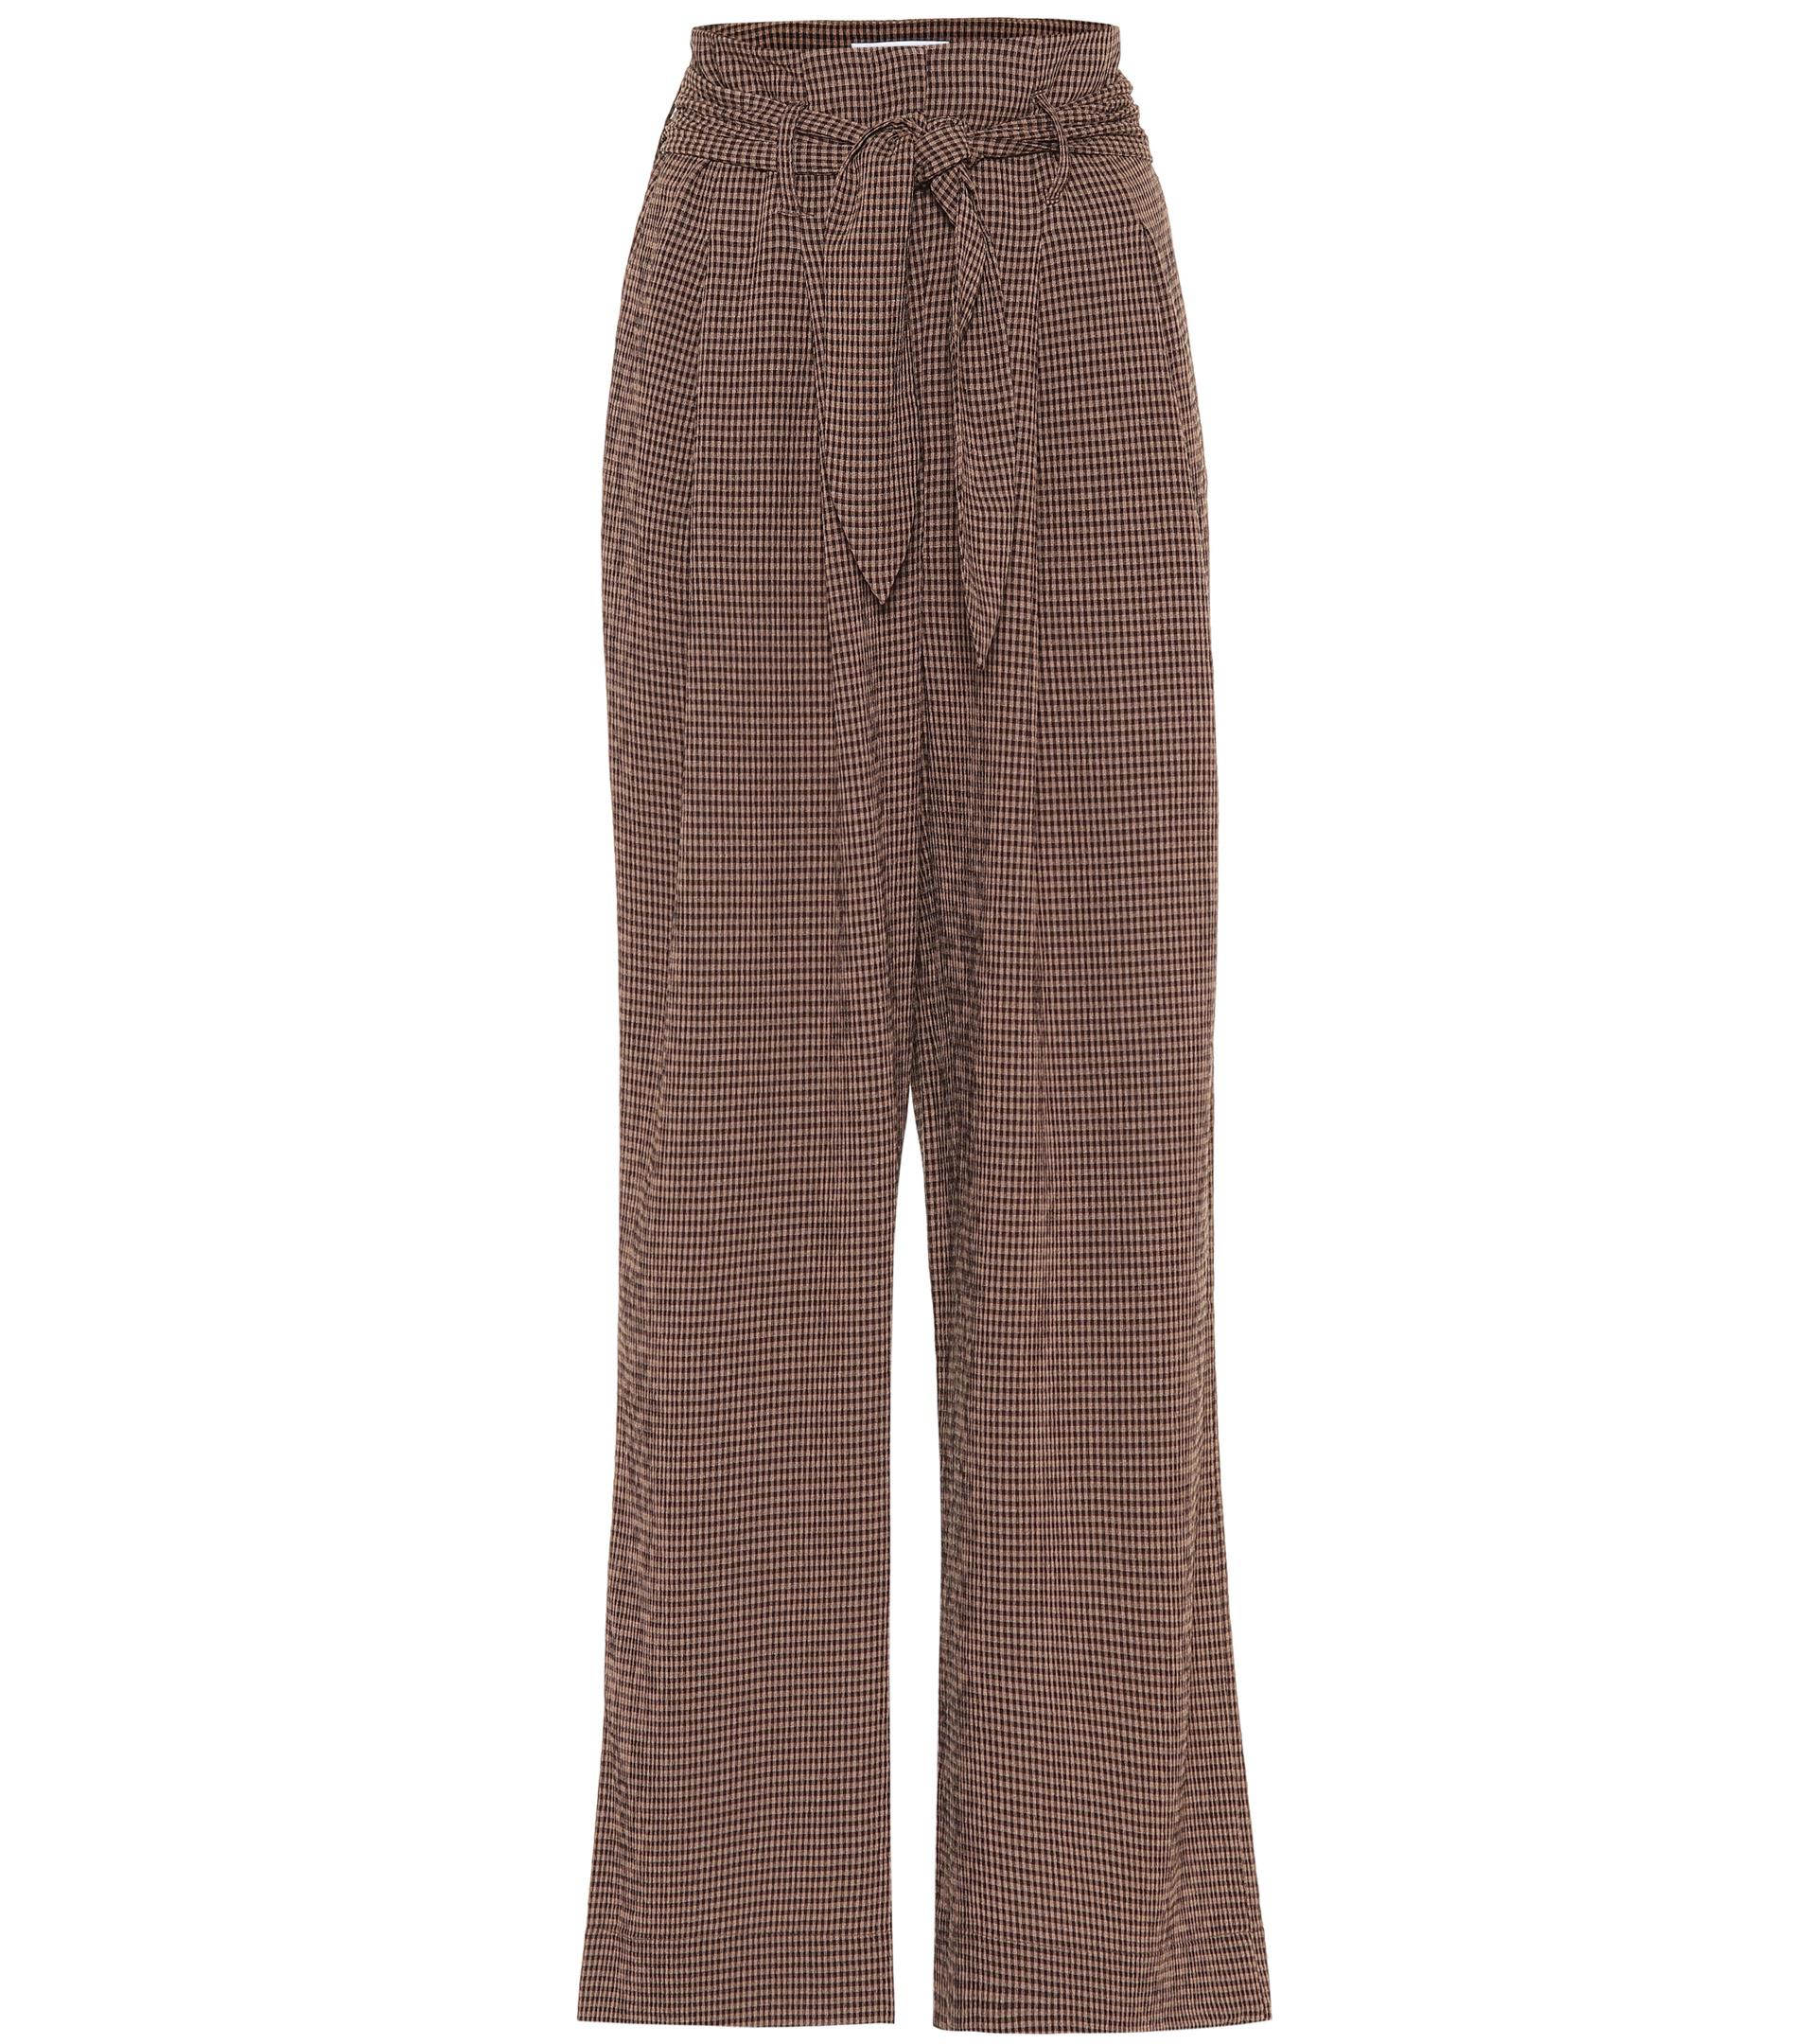 Nanushka Synthetic Nevada Checked Pants in Brown Check (Brown) - Lyst